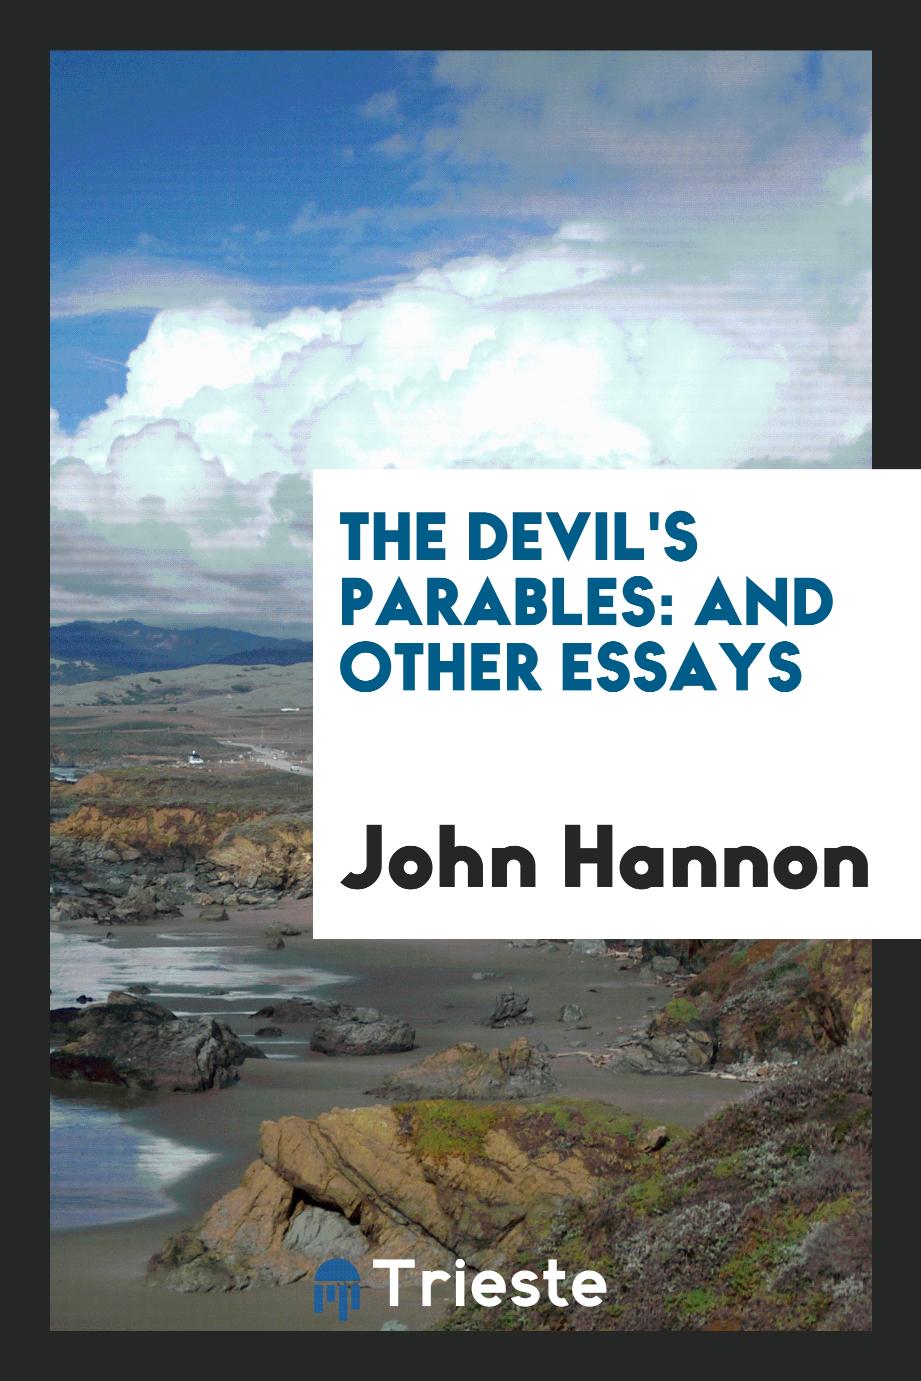 The Devil's Parables: And Other Essays